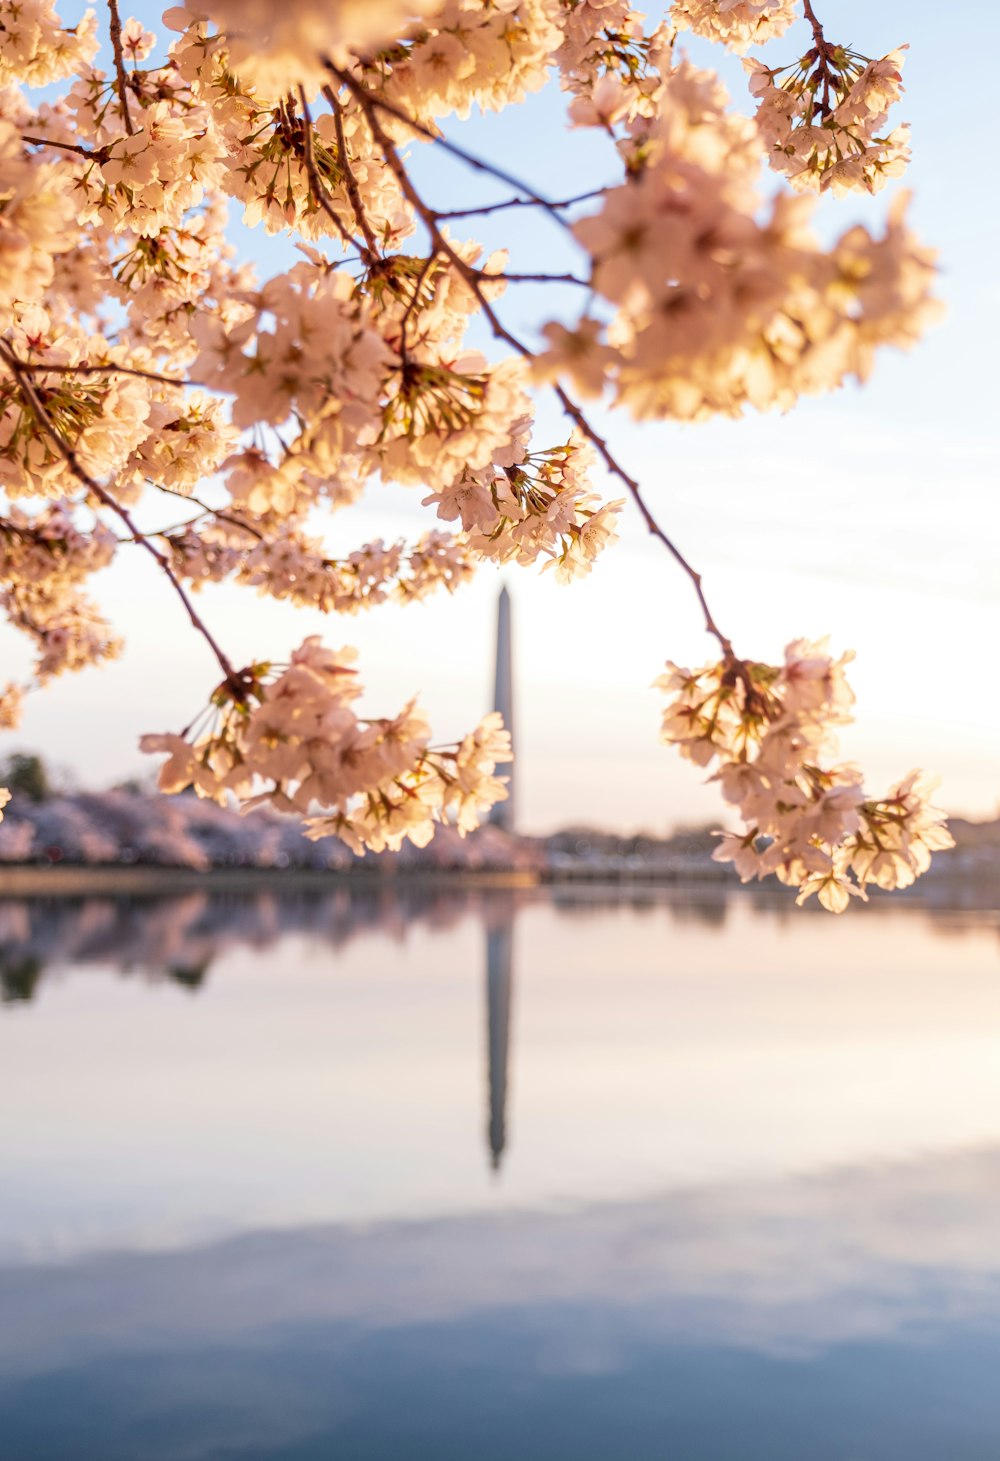 a cherry blossom tree with washington monument in the background